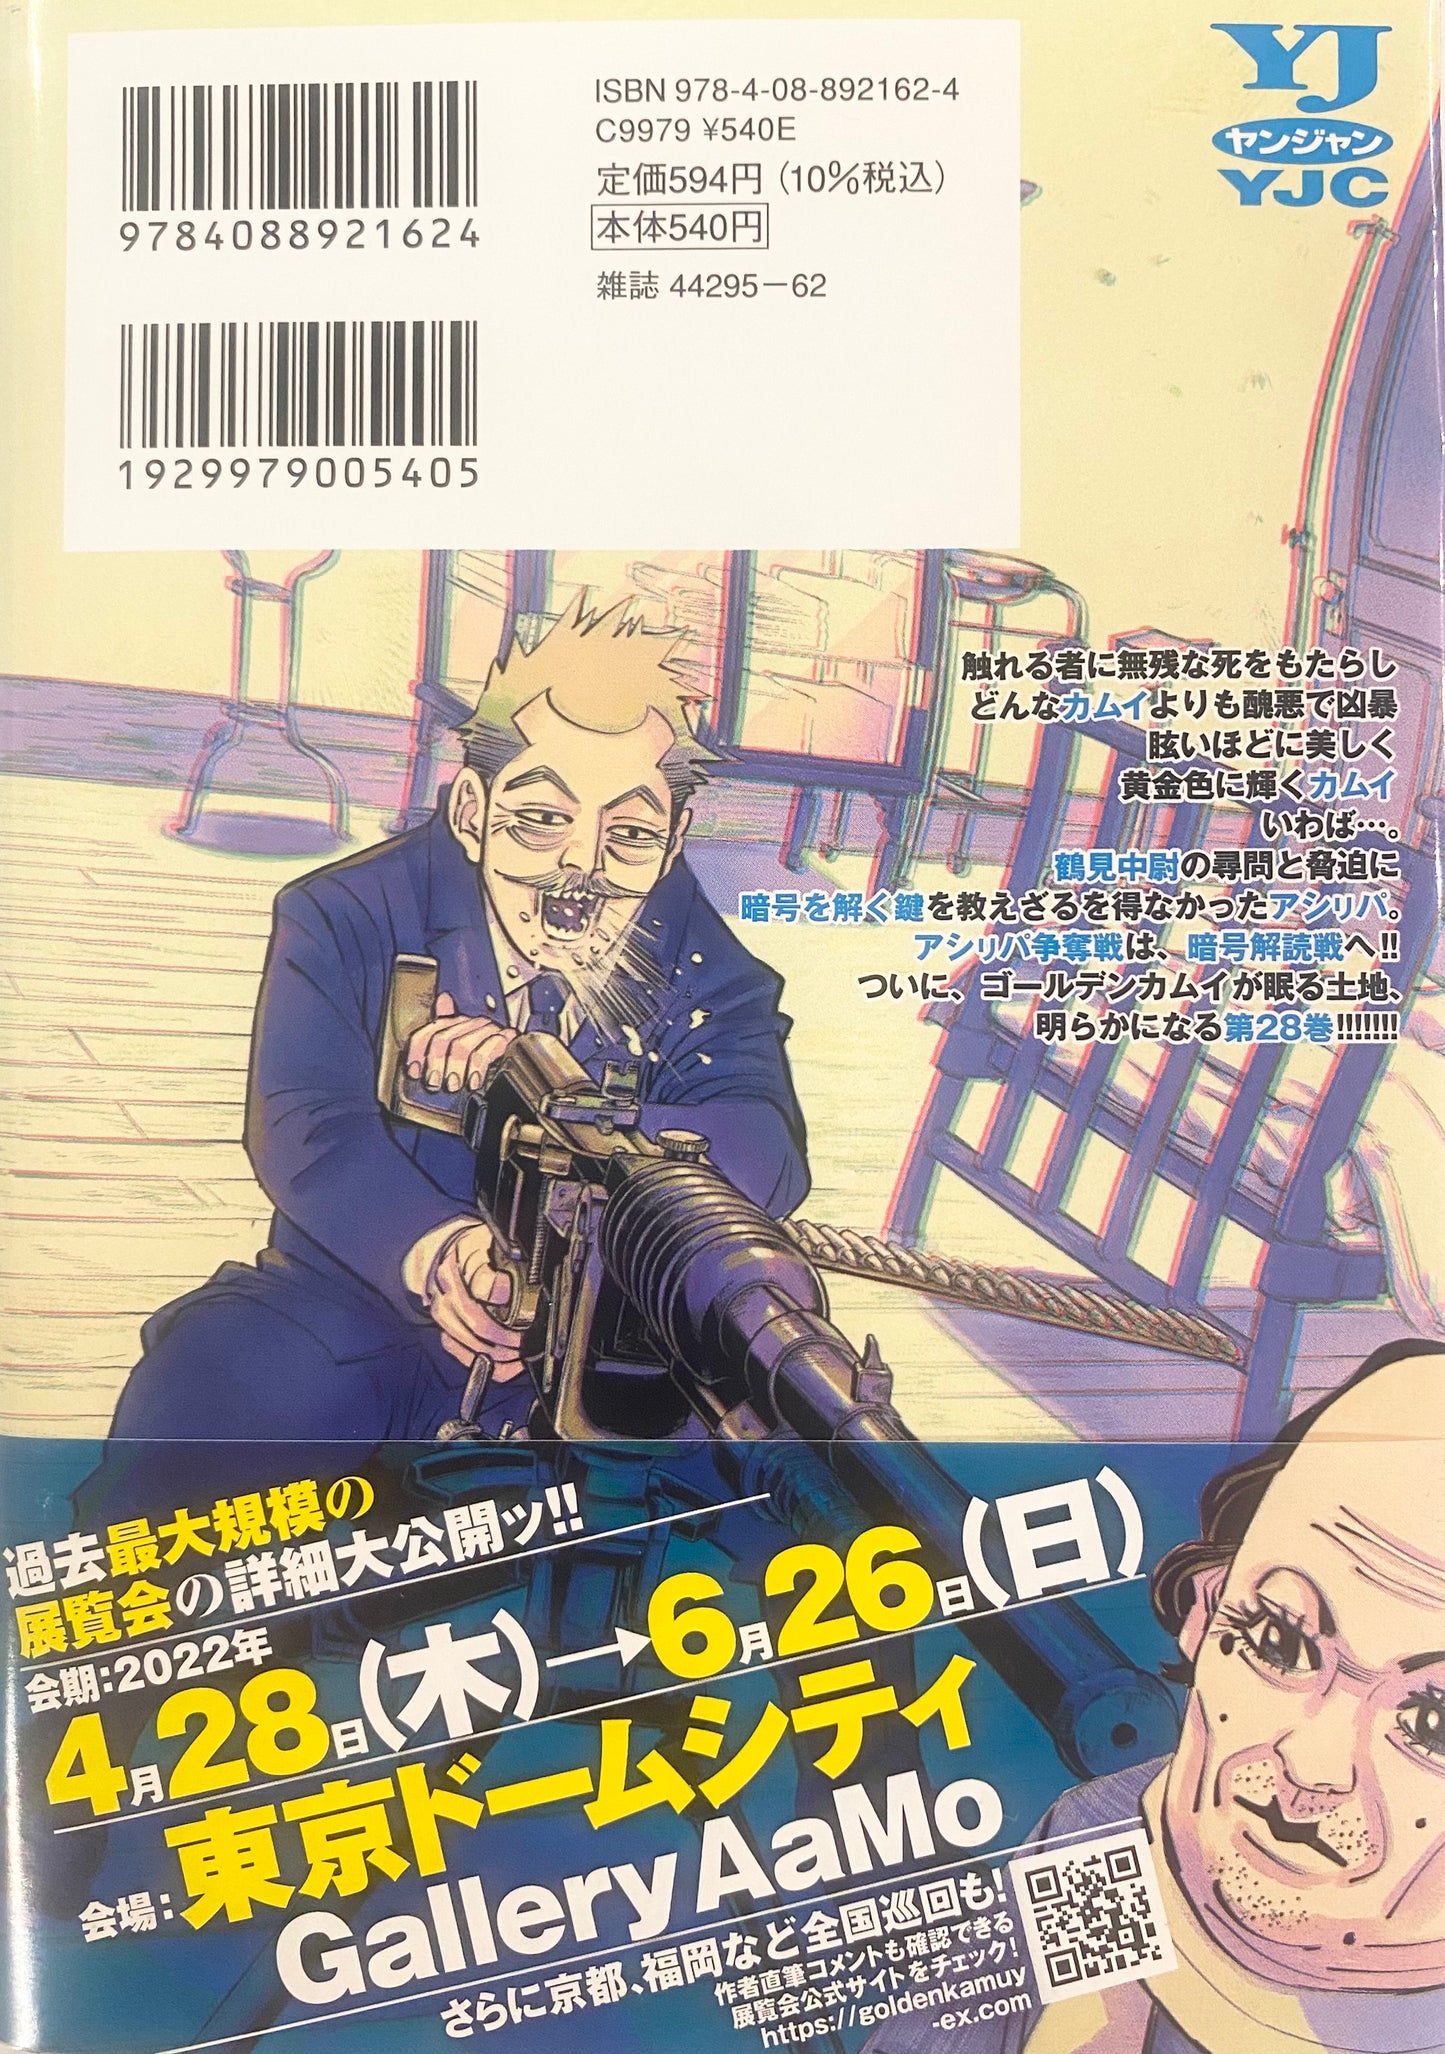 Golden Kamuy Vol.28-Official Japanese Edition